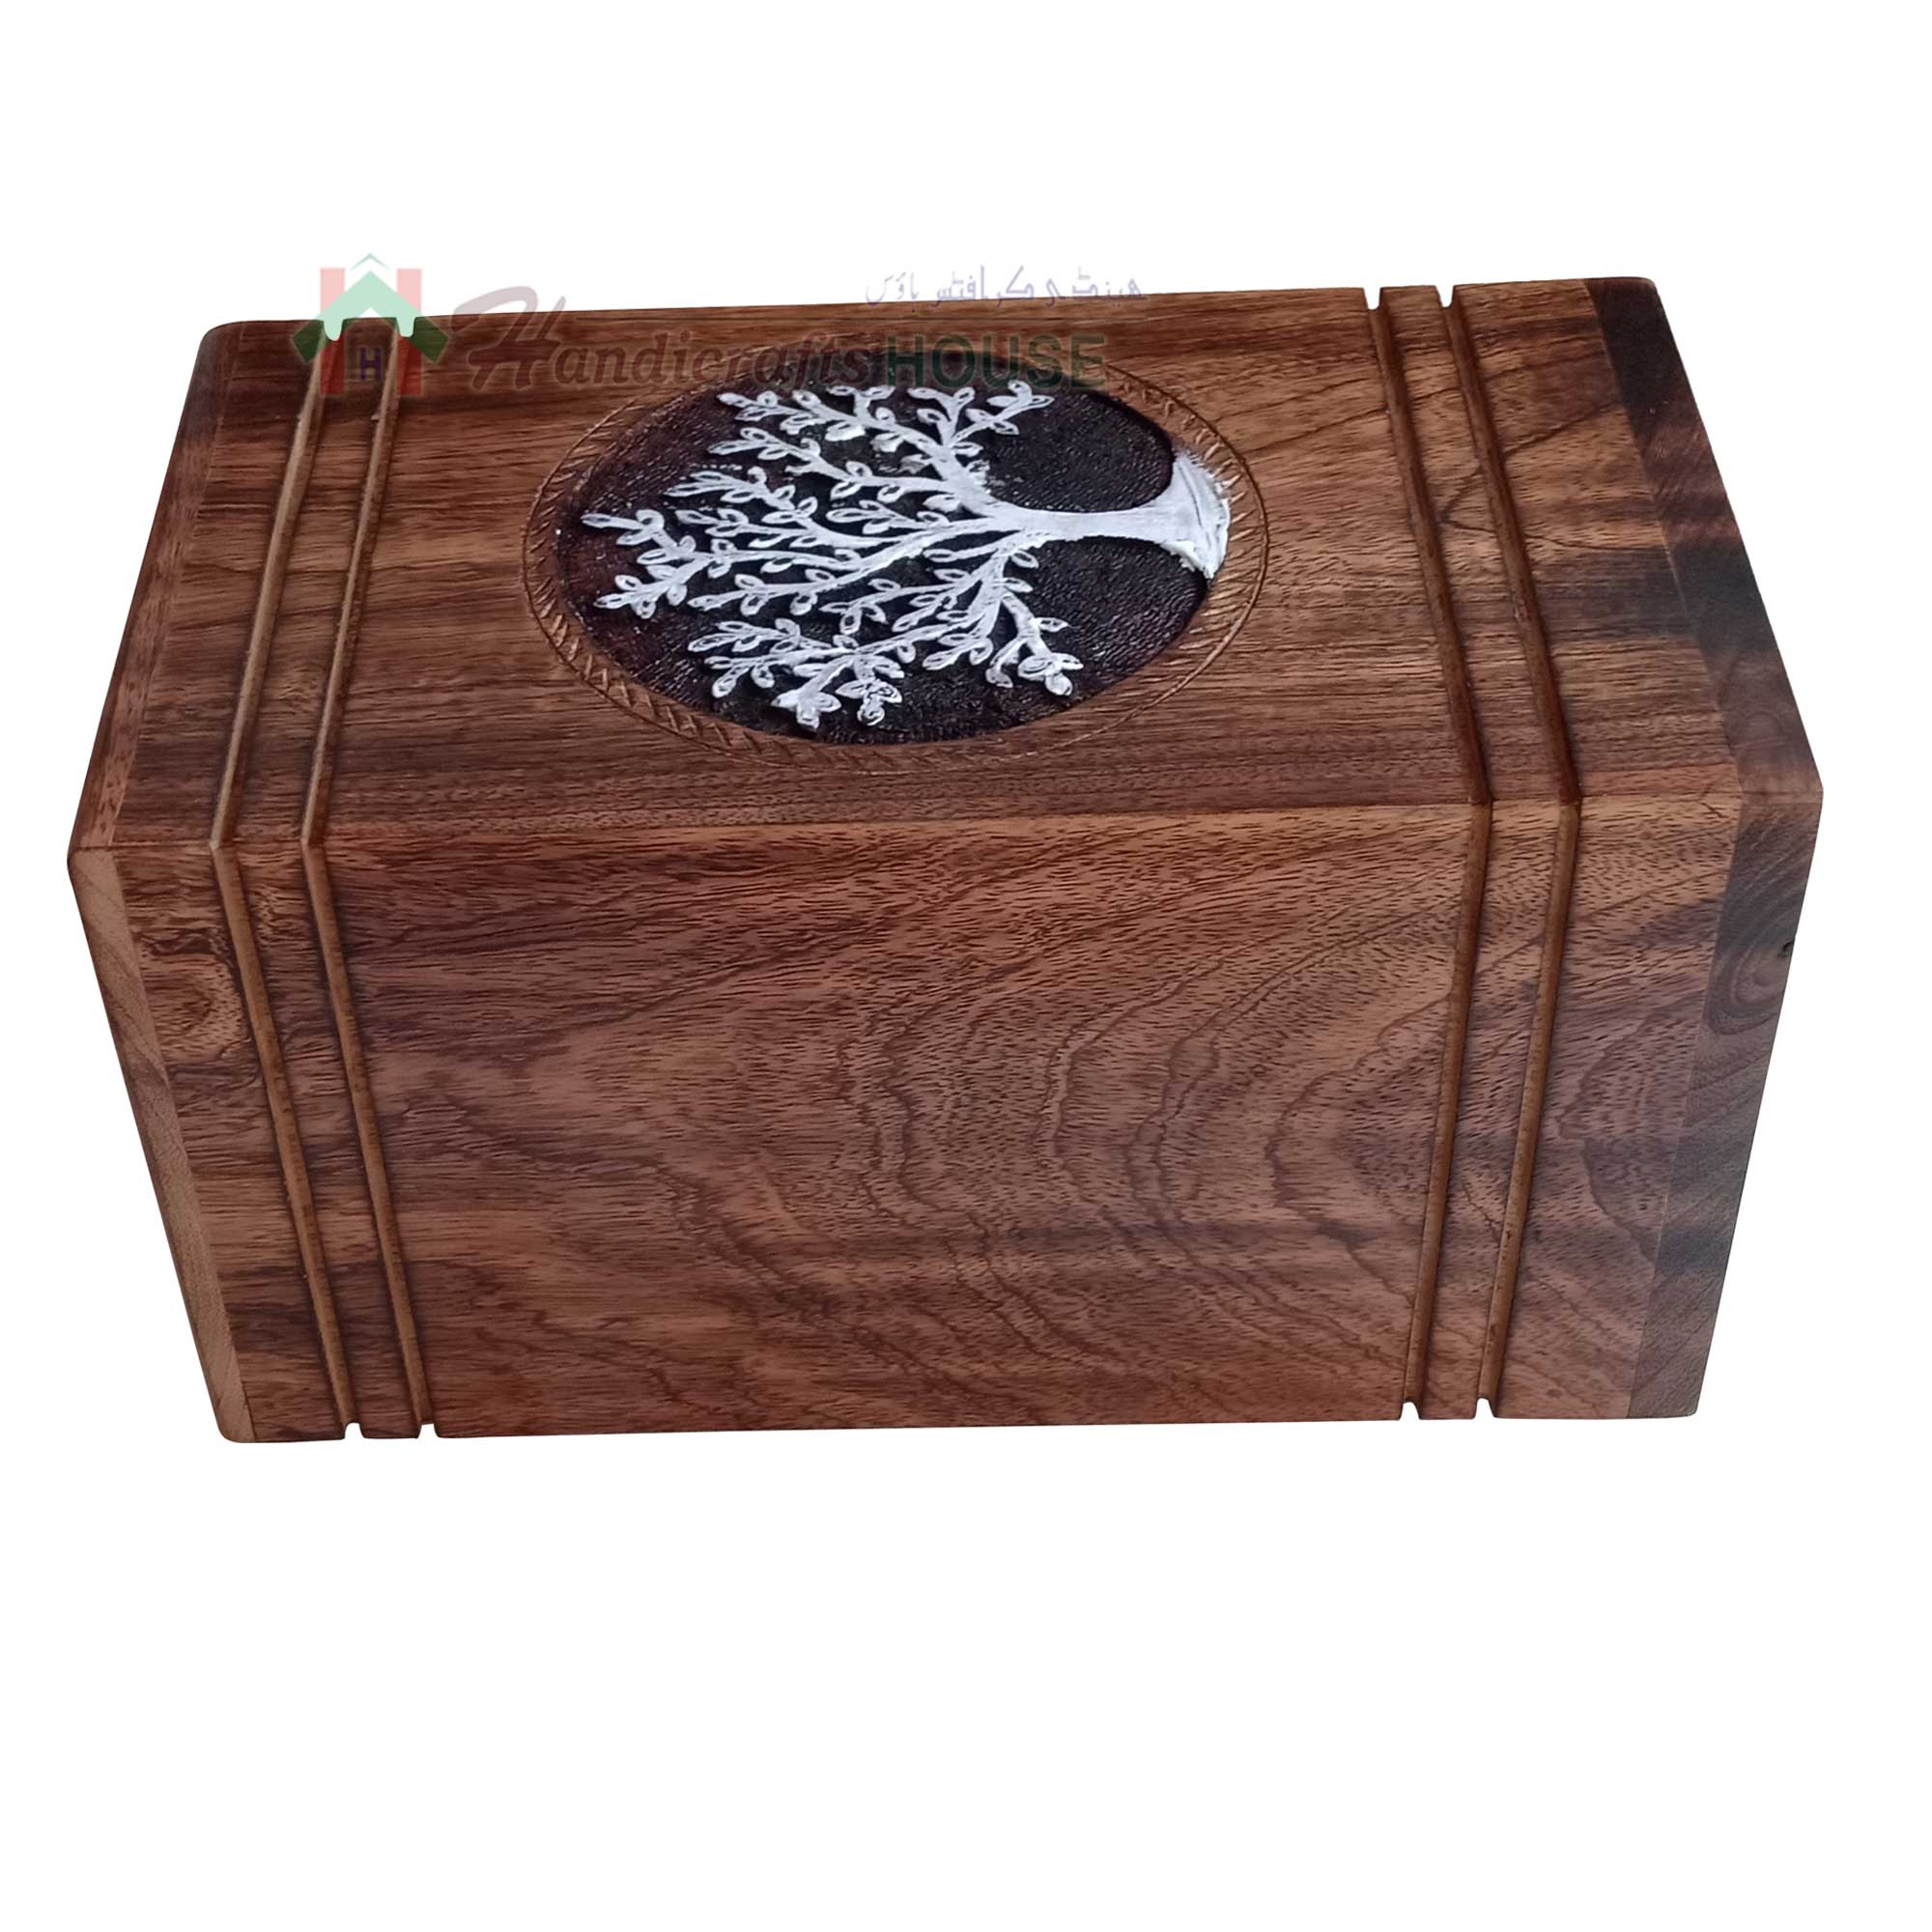 Tree of Life Wooden Cremation Urn for Human and Pet Ashes, Memorials Urns for Adult